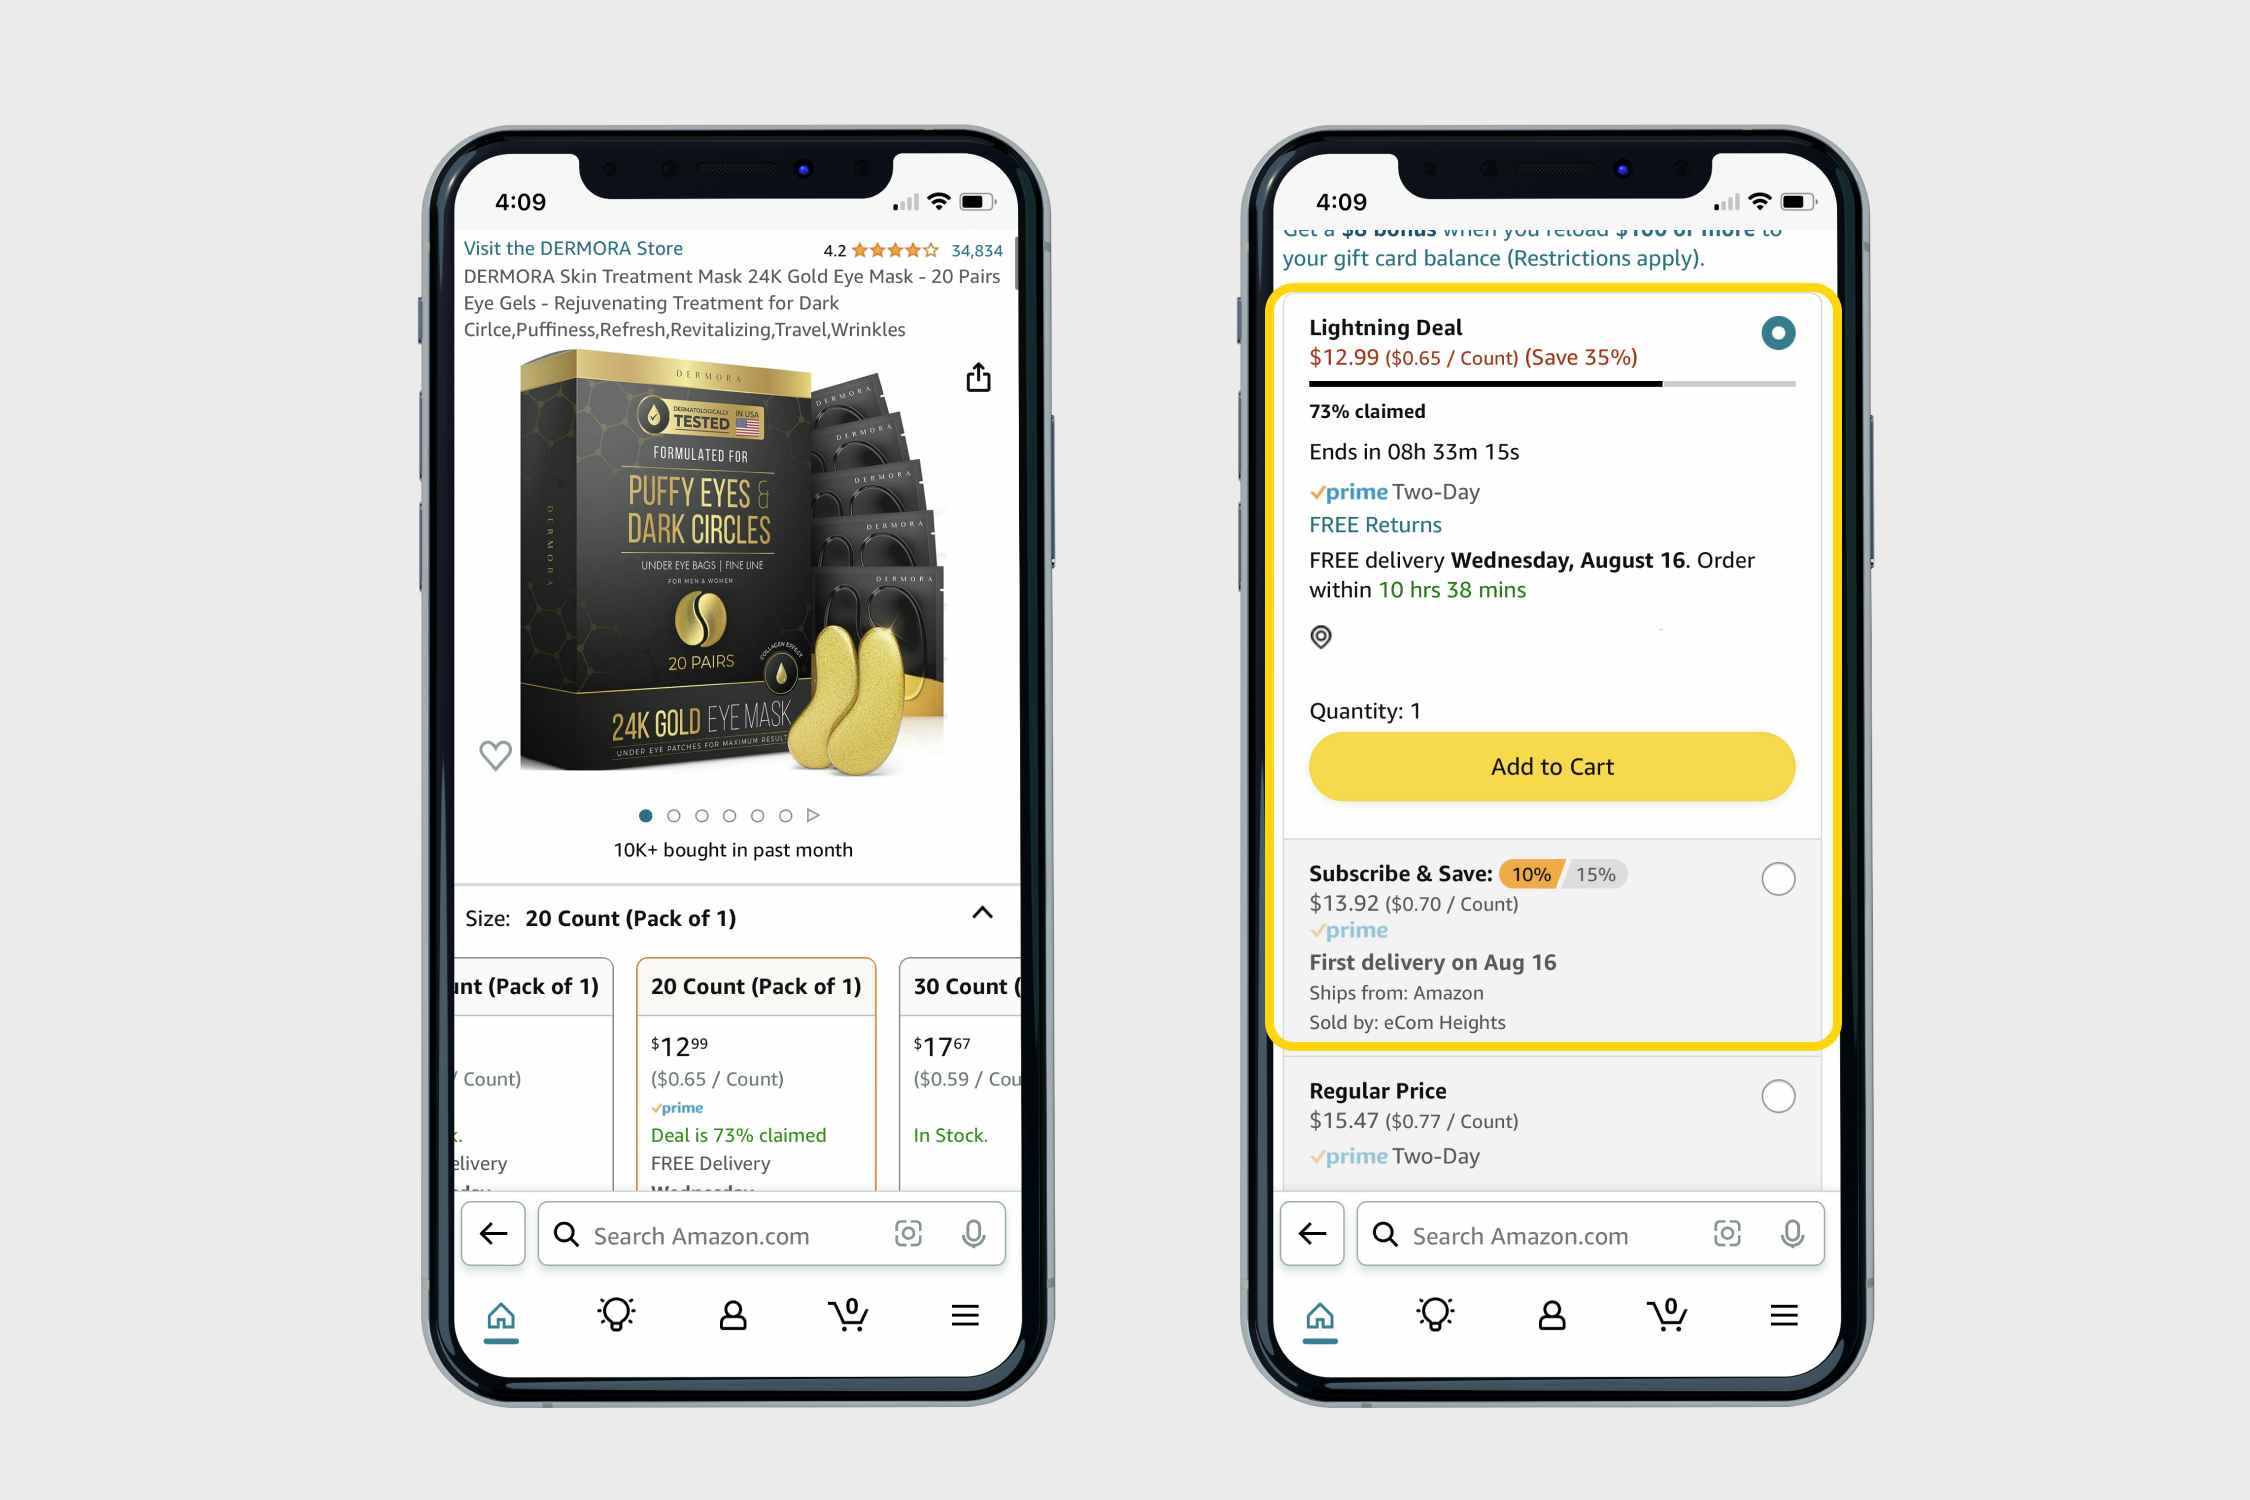 iphone screenshots with amazon lightning deals and subscribe-and-save